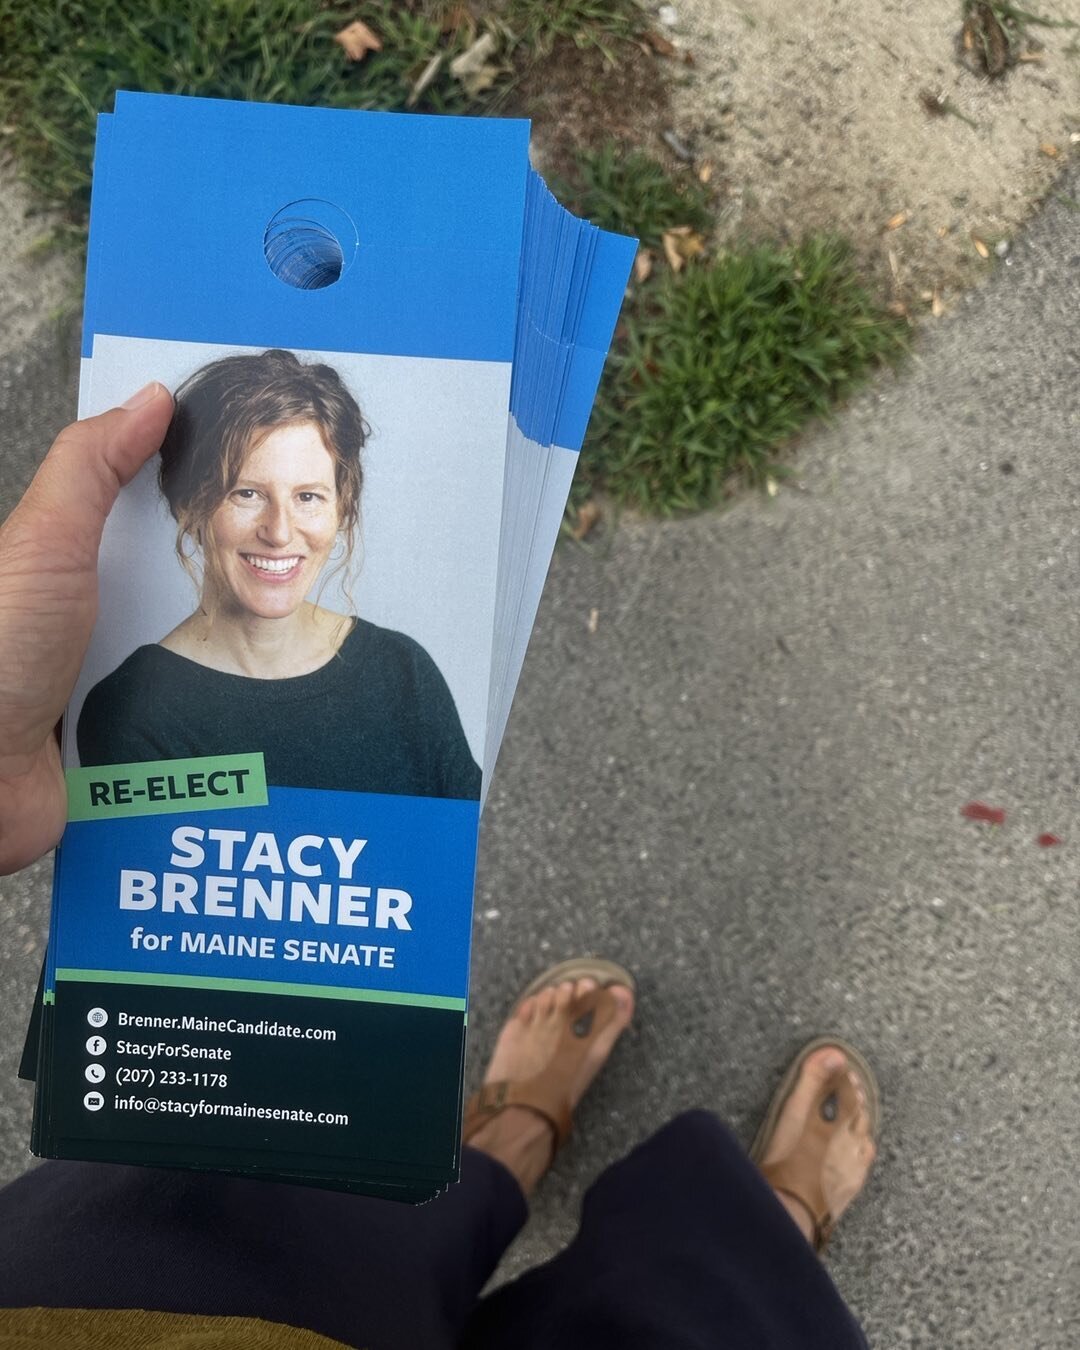 Out #canvassing for this amazing and skilled human.  I&rsquo;ll admit. I get wicked nervous - like shake in my sandals nervous. But I just got invited to sit and talk with a neighbor I&rsquo;ve never met. And people are kind and sharing what&rsquo;s 